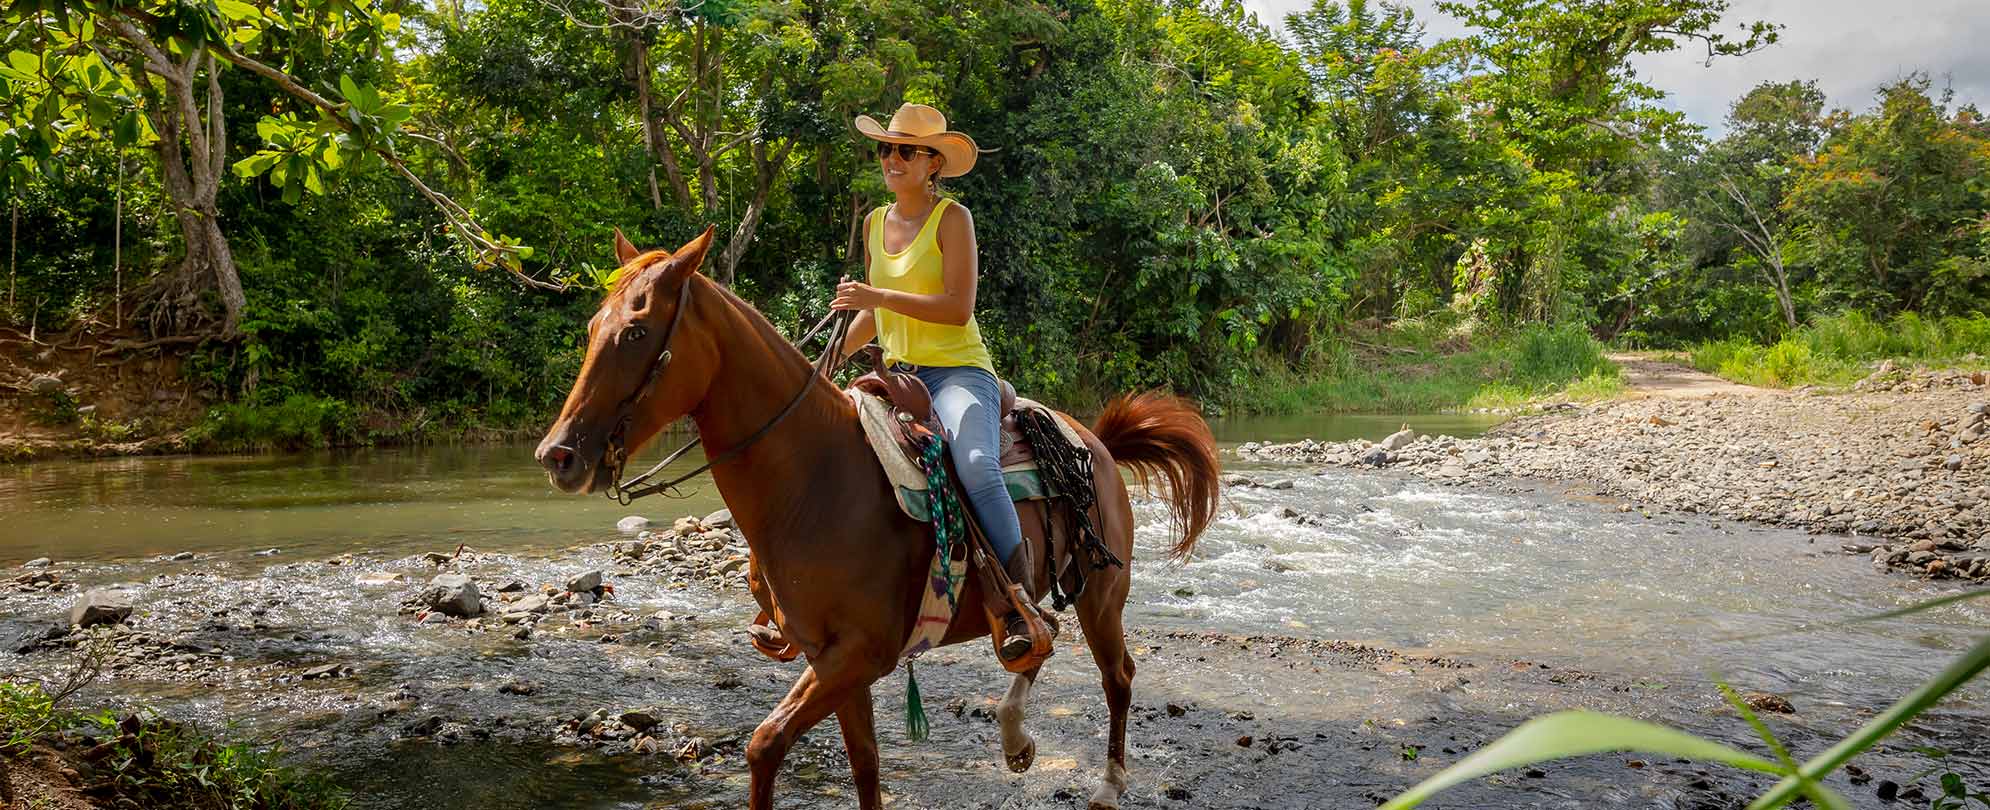 A woman rides a horse through a stream, enjoying outdoor adventures in Puerto Rico during her Margaritaville vacation.